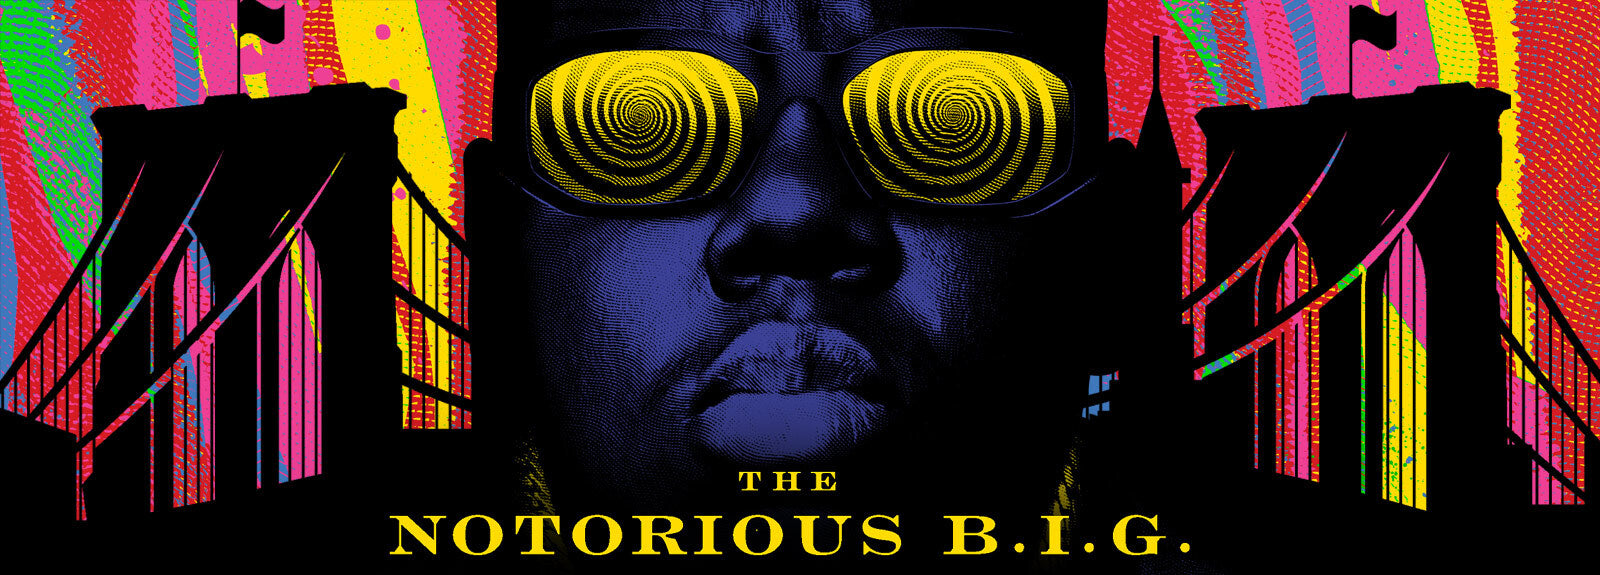 The Notorious B.I.G. Life After Death 25th Anniversary